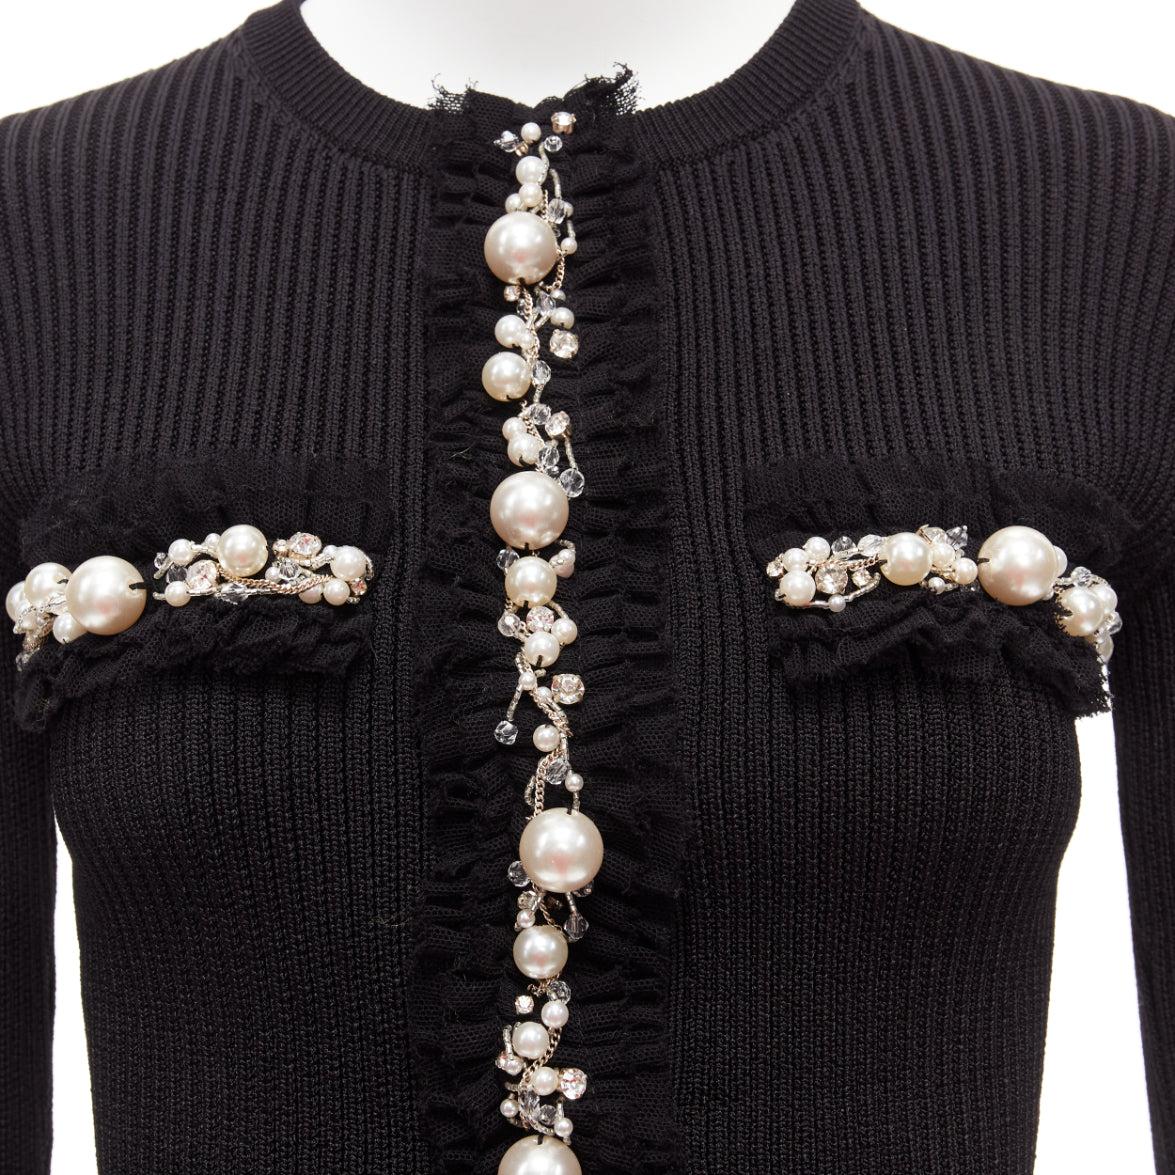 BALMAIN black ribbed pearl jewel crystal embellished cropped cardigan FR36 XS
Reference: AAWC/A00621
Brand: Balmain
Designer: Olivier Rousteing
Material: Viscose, Polyamide
Color: Black, White
Pattern: Solid
Closure: Snap Buttons
Extra Details: